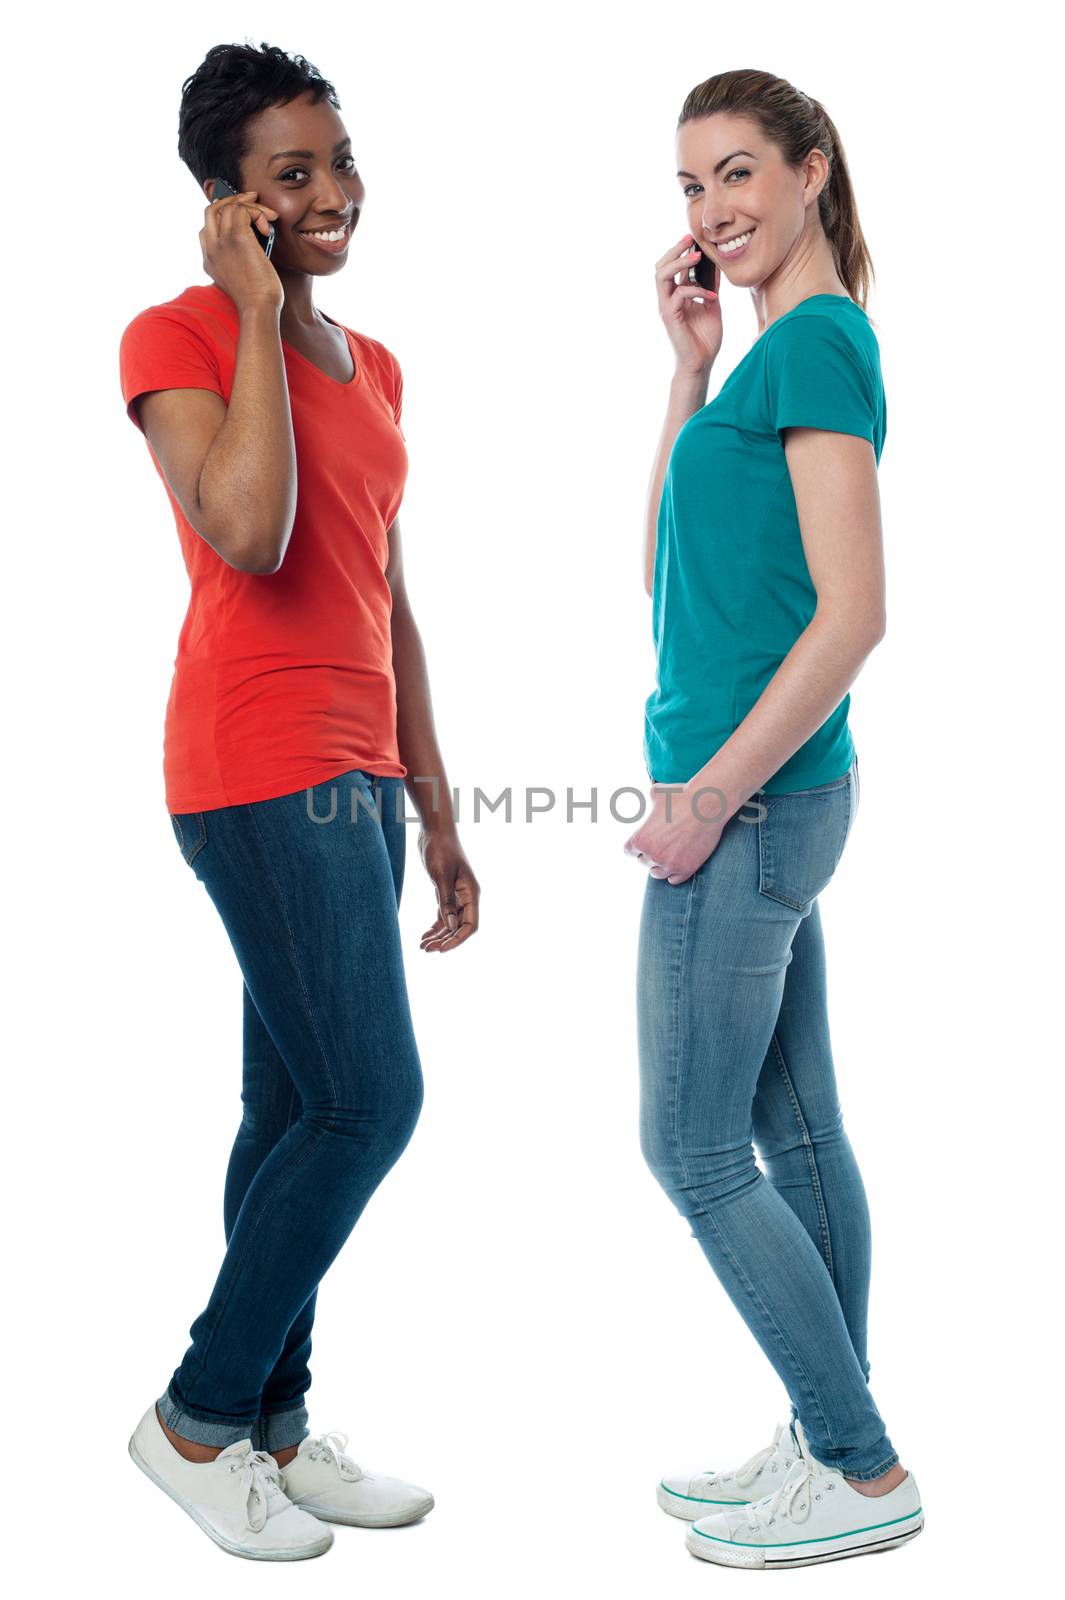 Trendy females speaking over cellphone by stockyimages